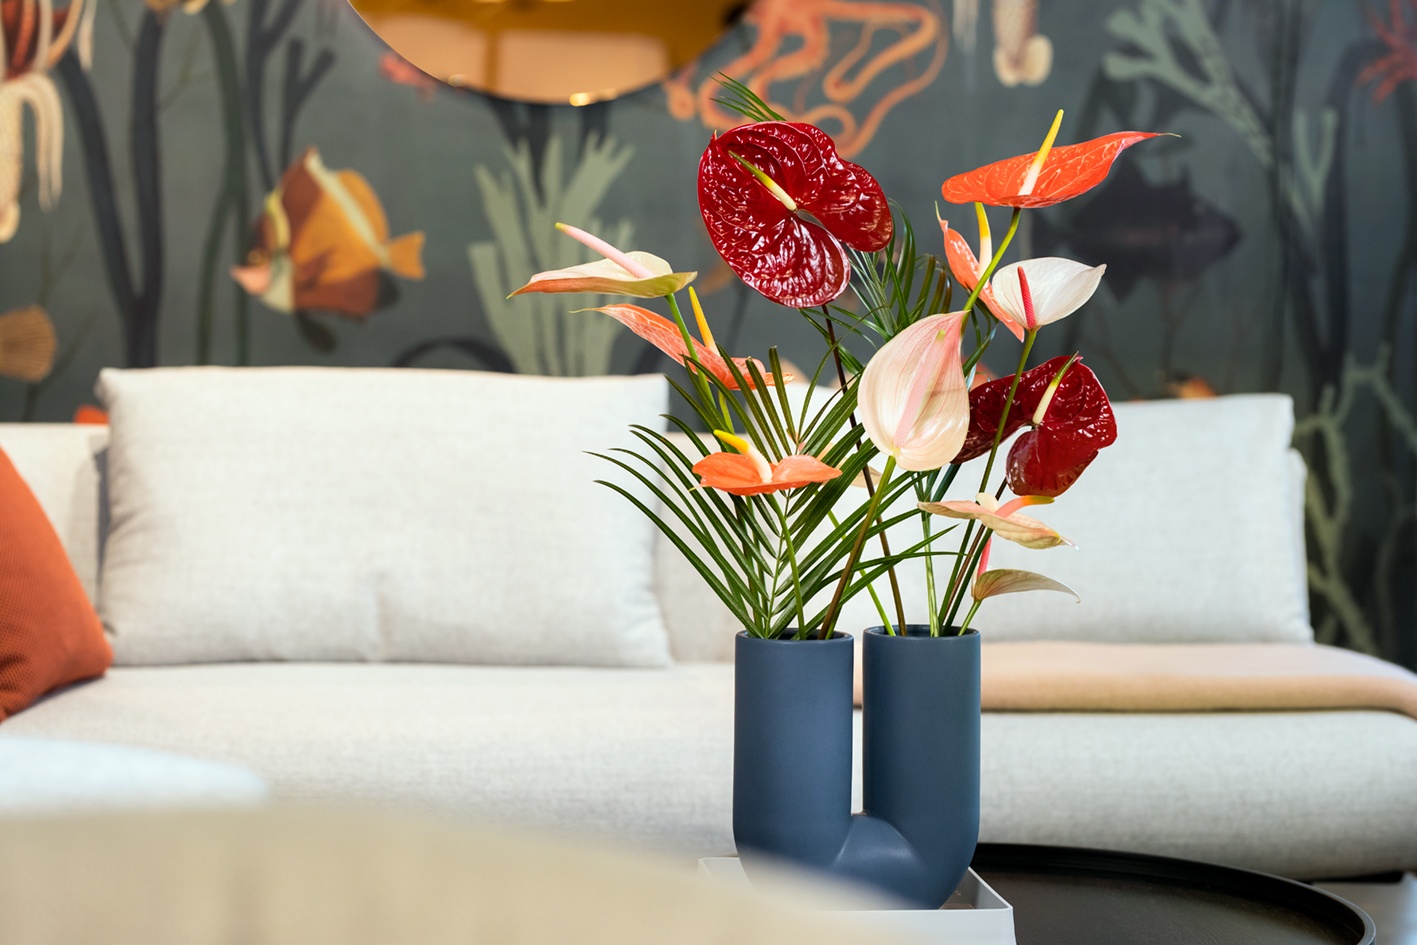 How to style colorful Anthurium flowers